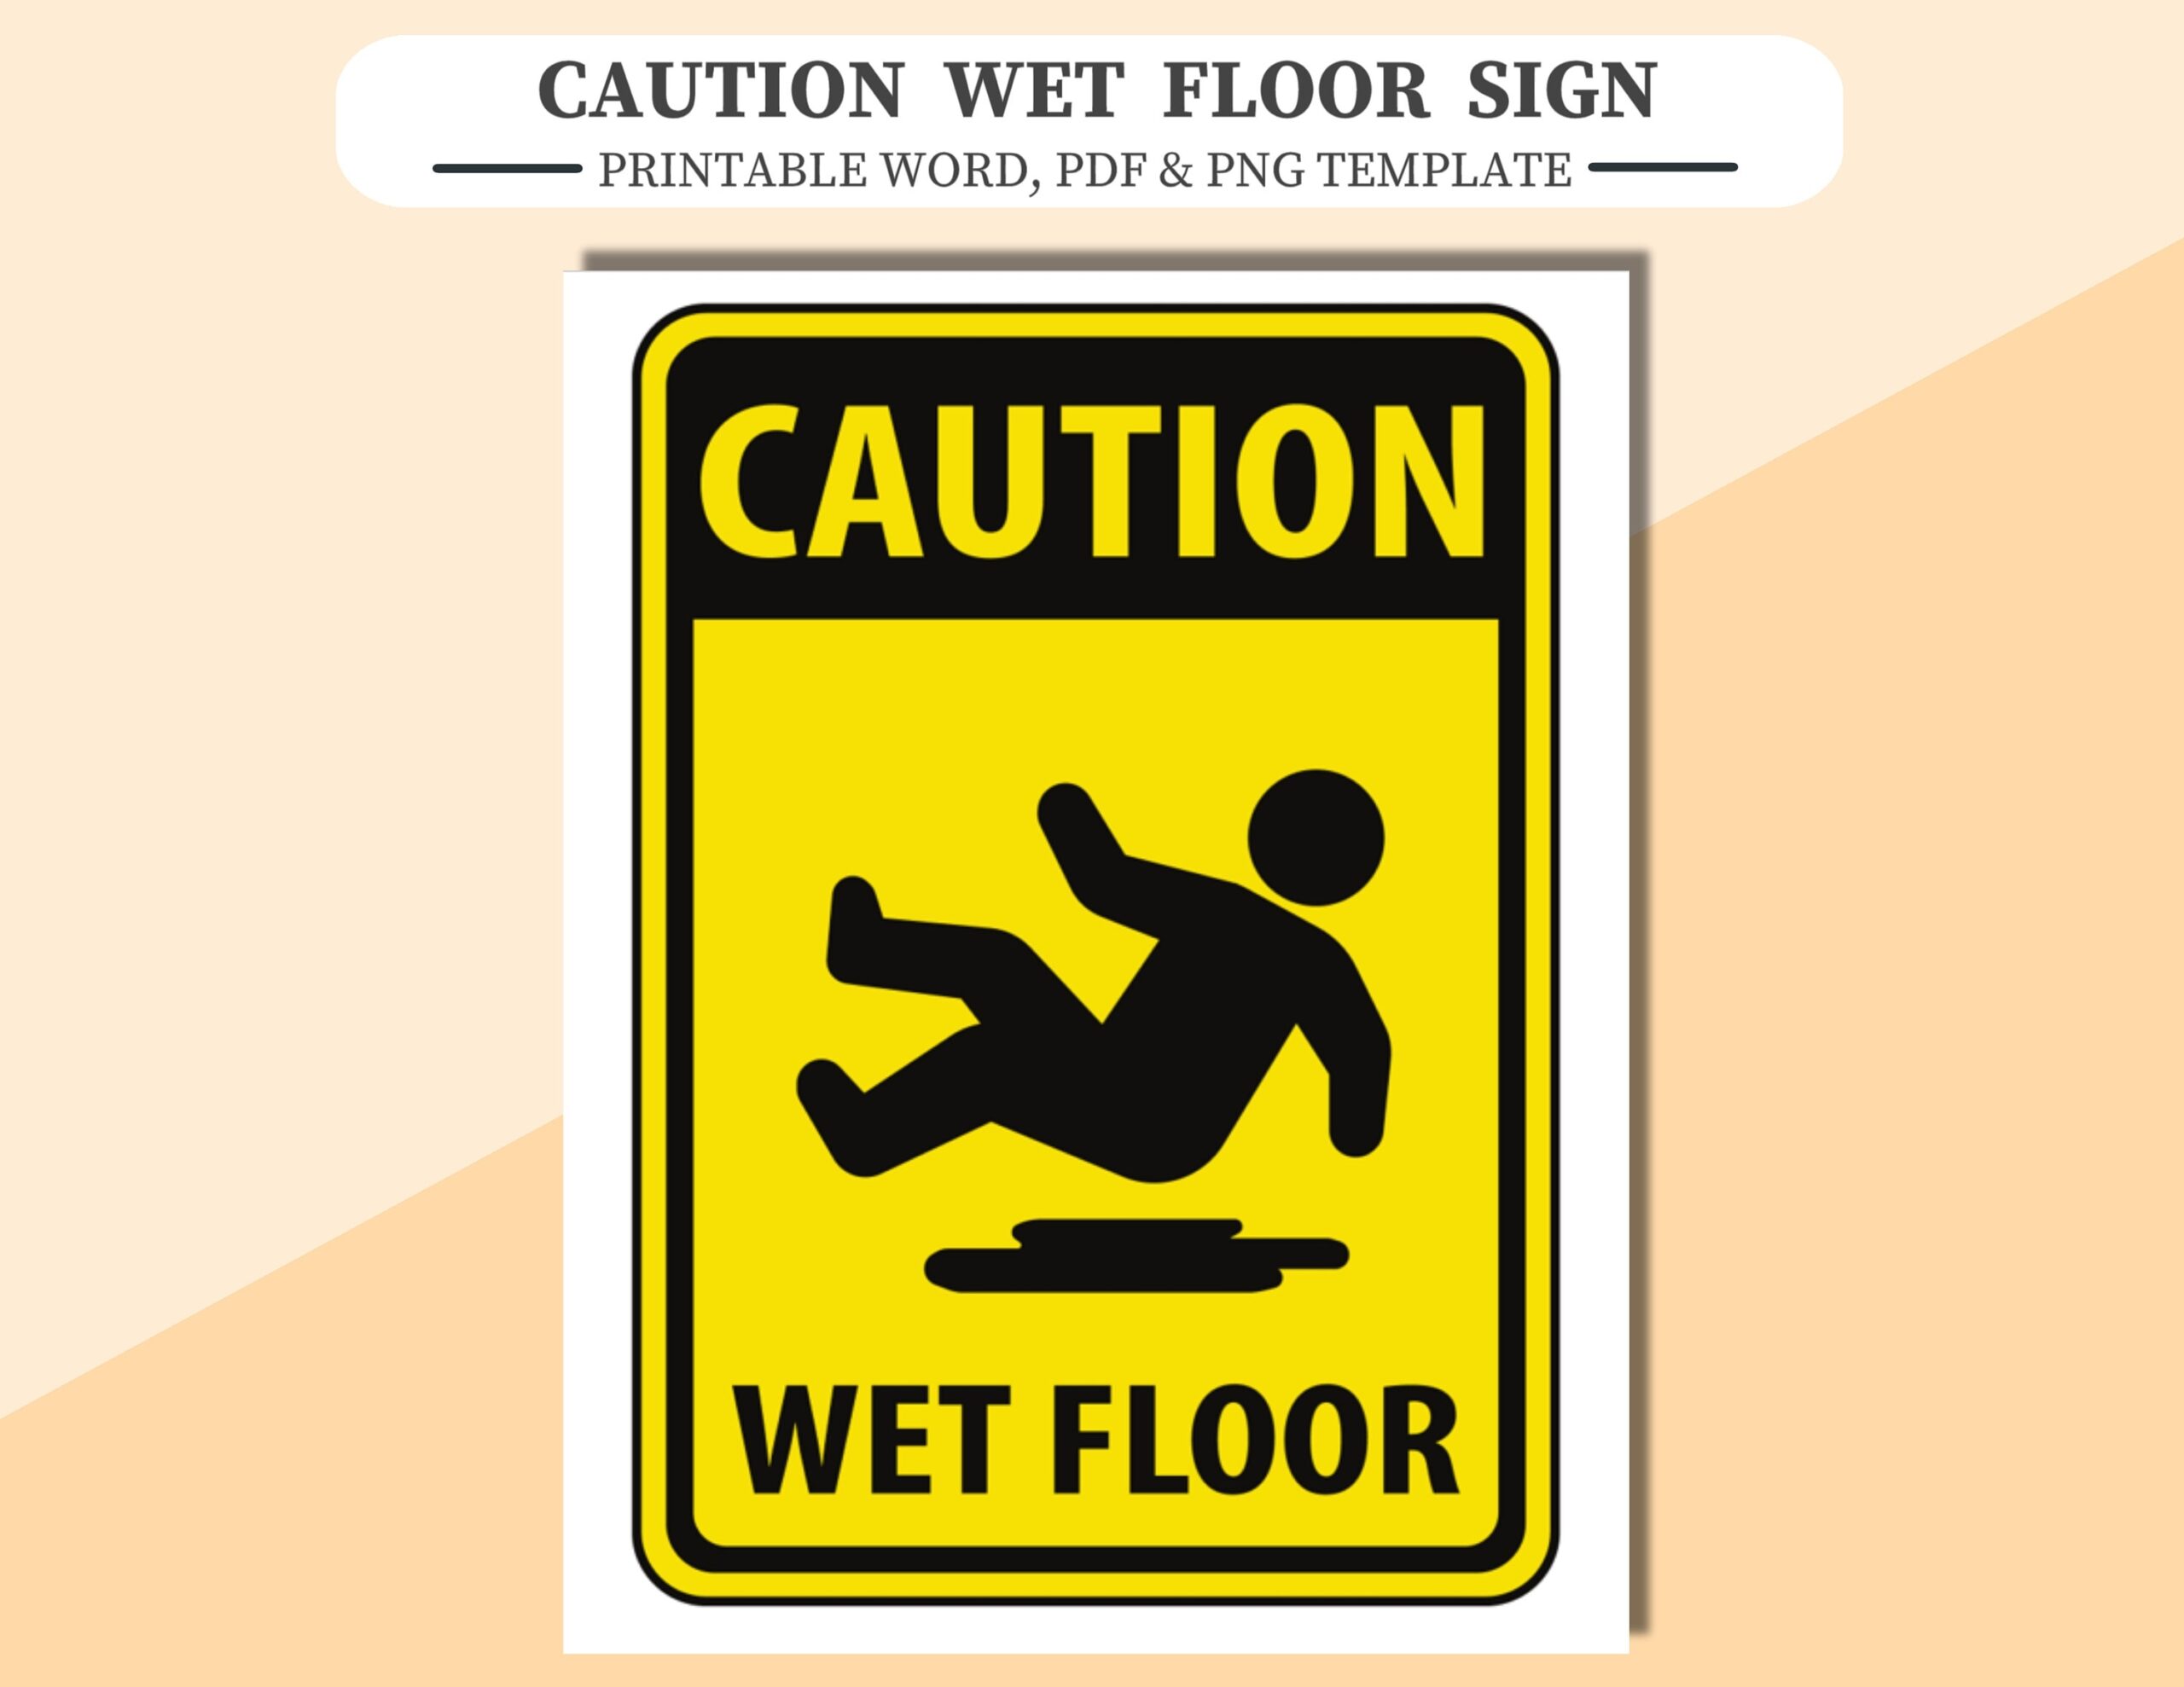 Caution Wet Floor Sign Printable Word And PDF File Plus PNG Image File Caution Wet Floor Etsy